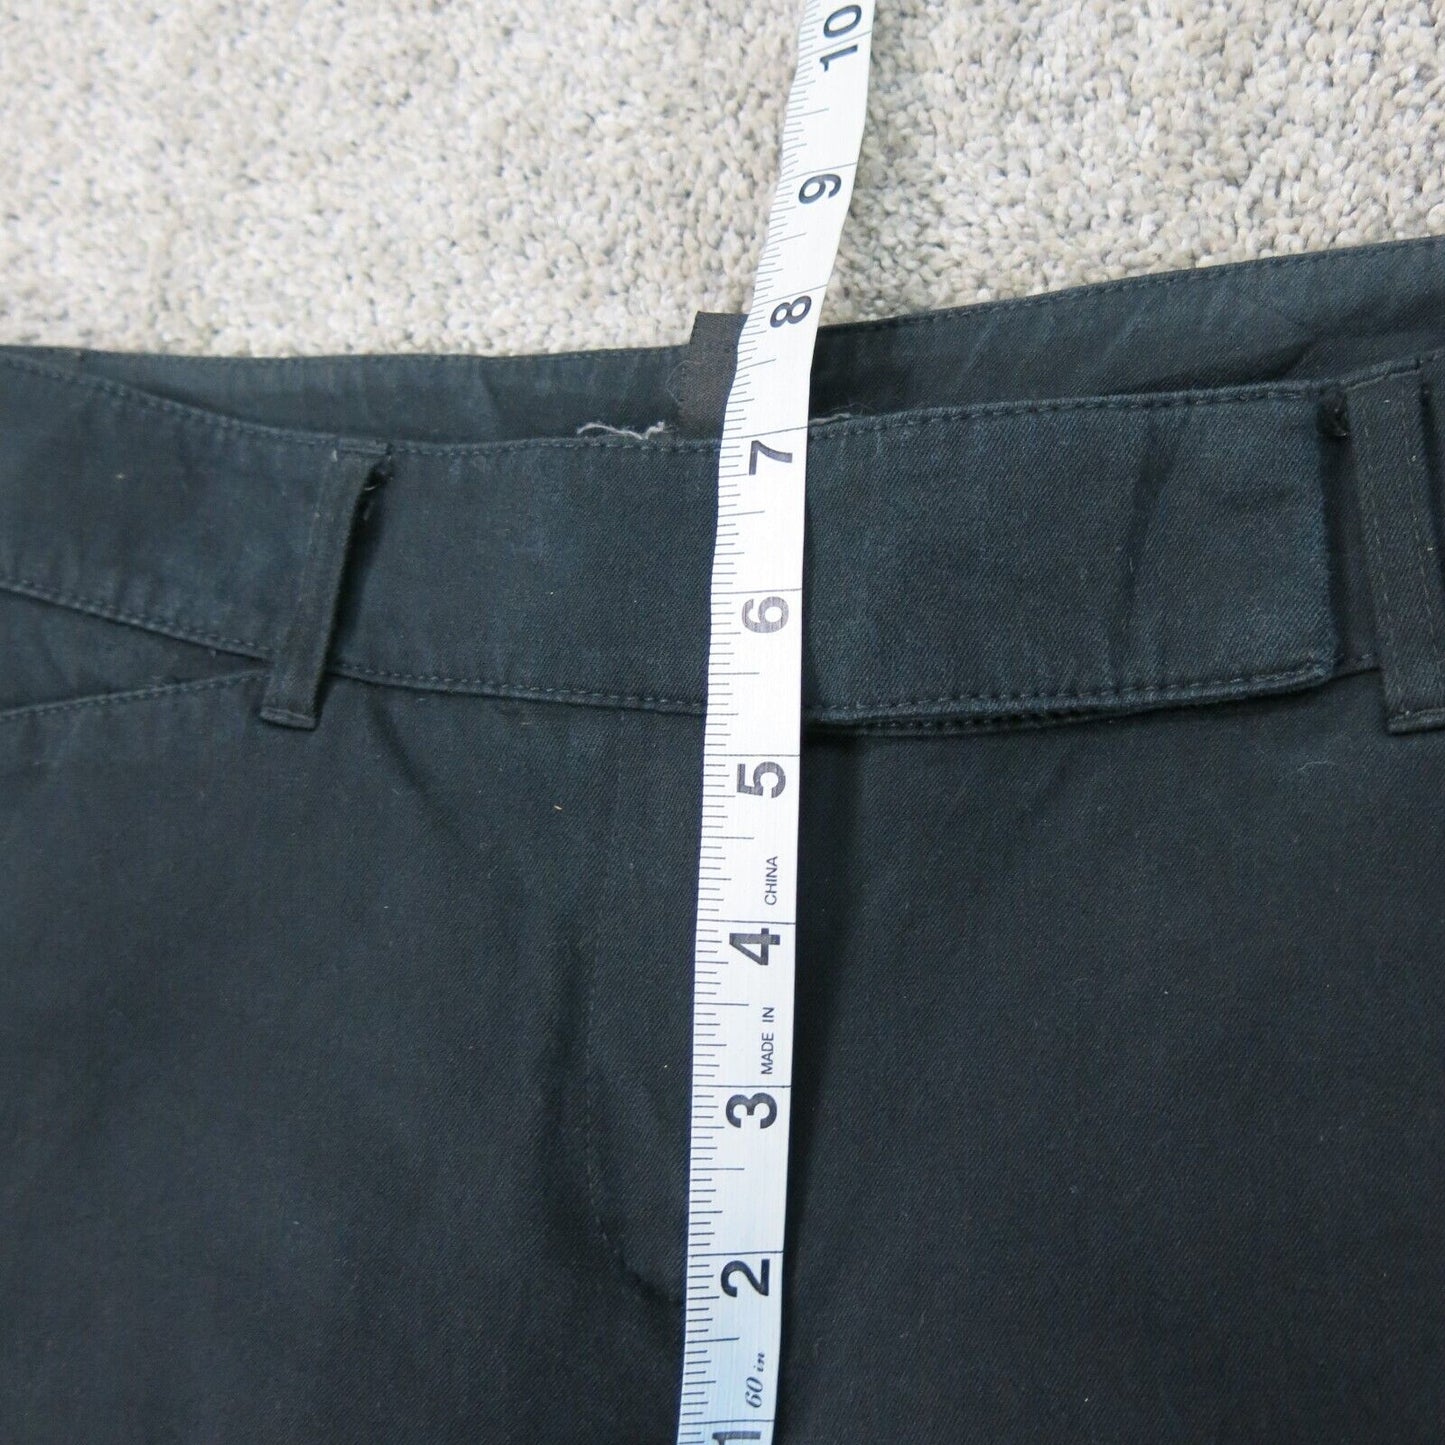 Pants Ankle By White House Black Market Size: 10